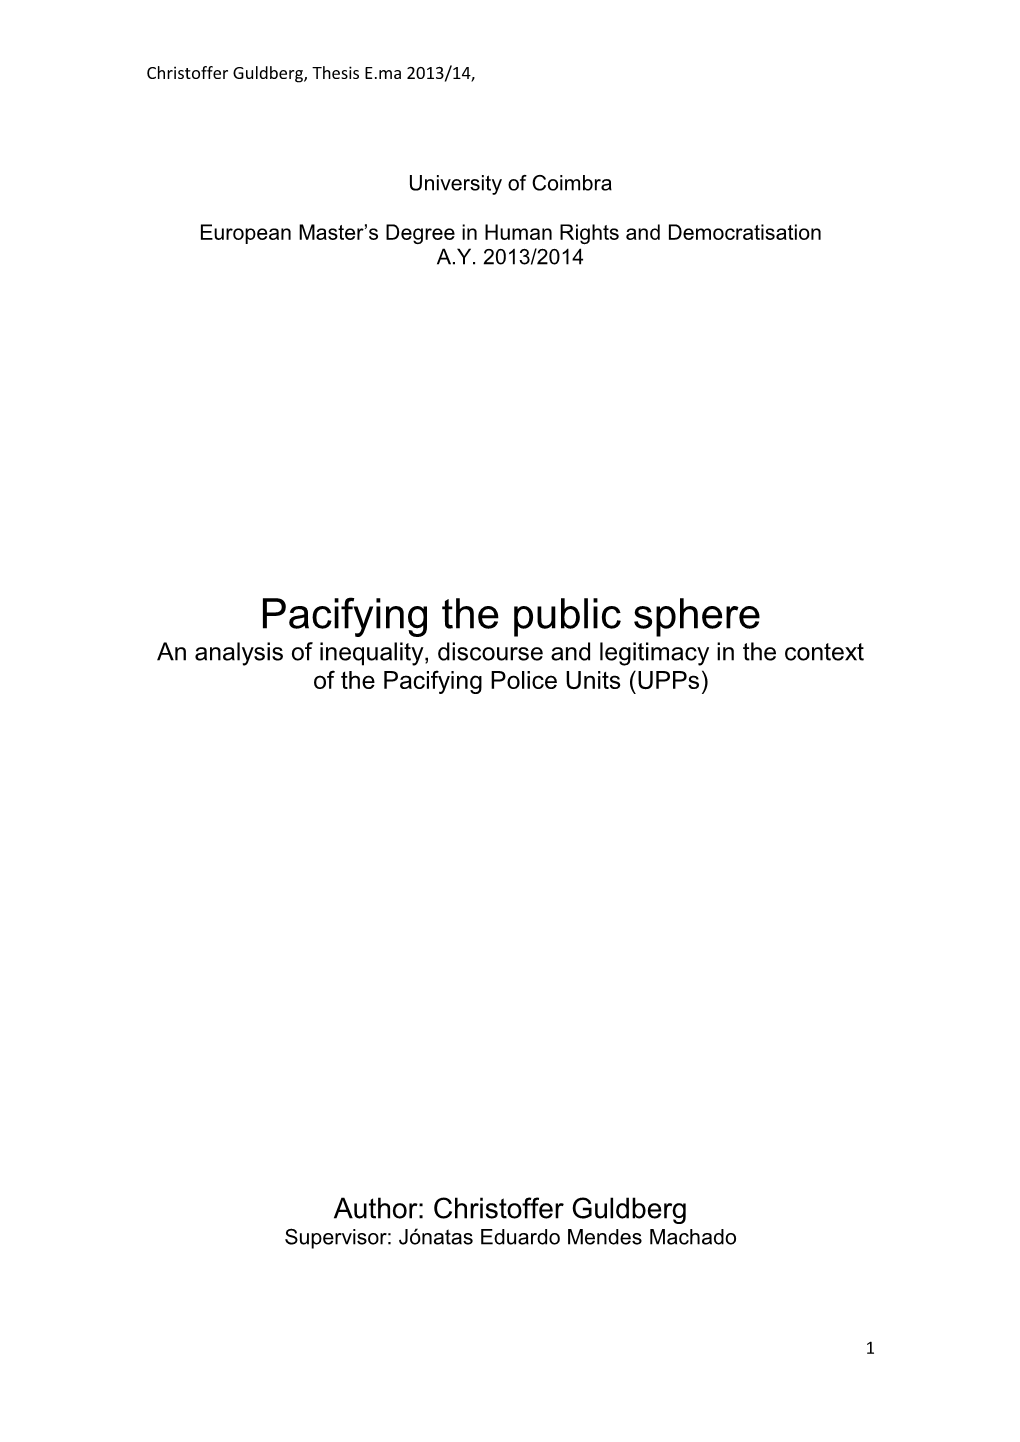 Pacifying the Public Sphere an Analysis of Inequality, Discourse and Legitimacy in the Context of the Pacifying Police Units (Upps)